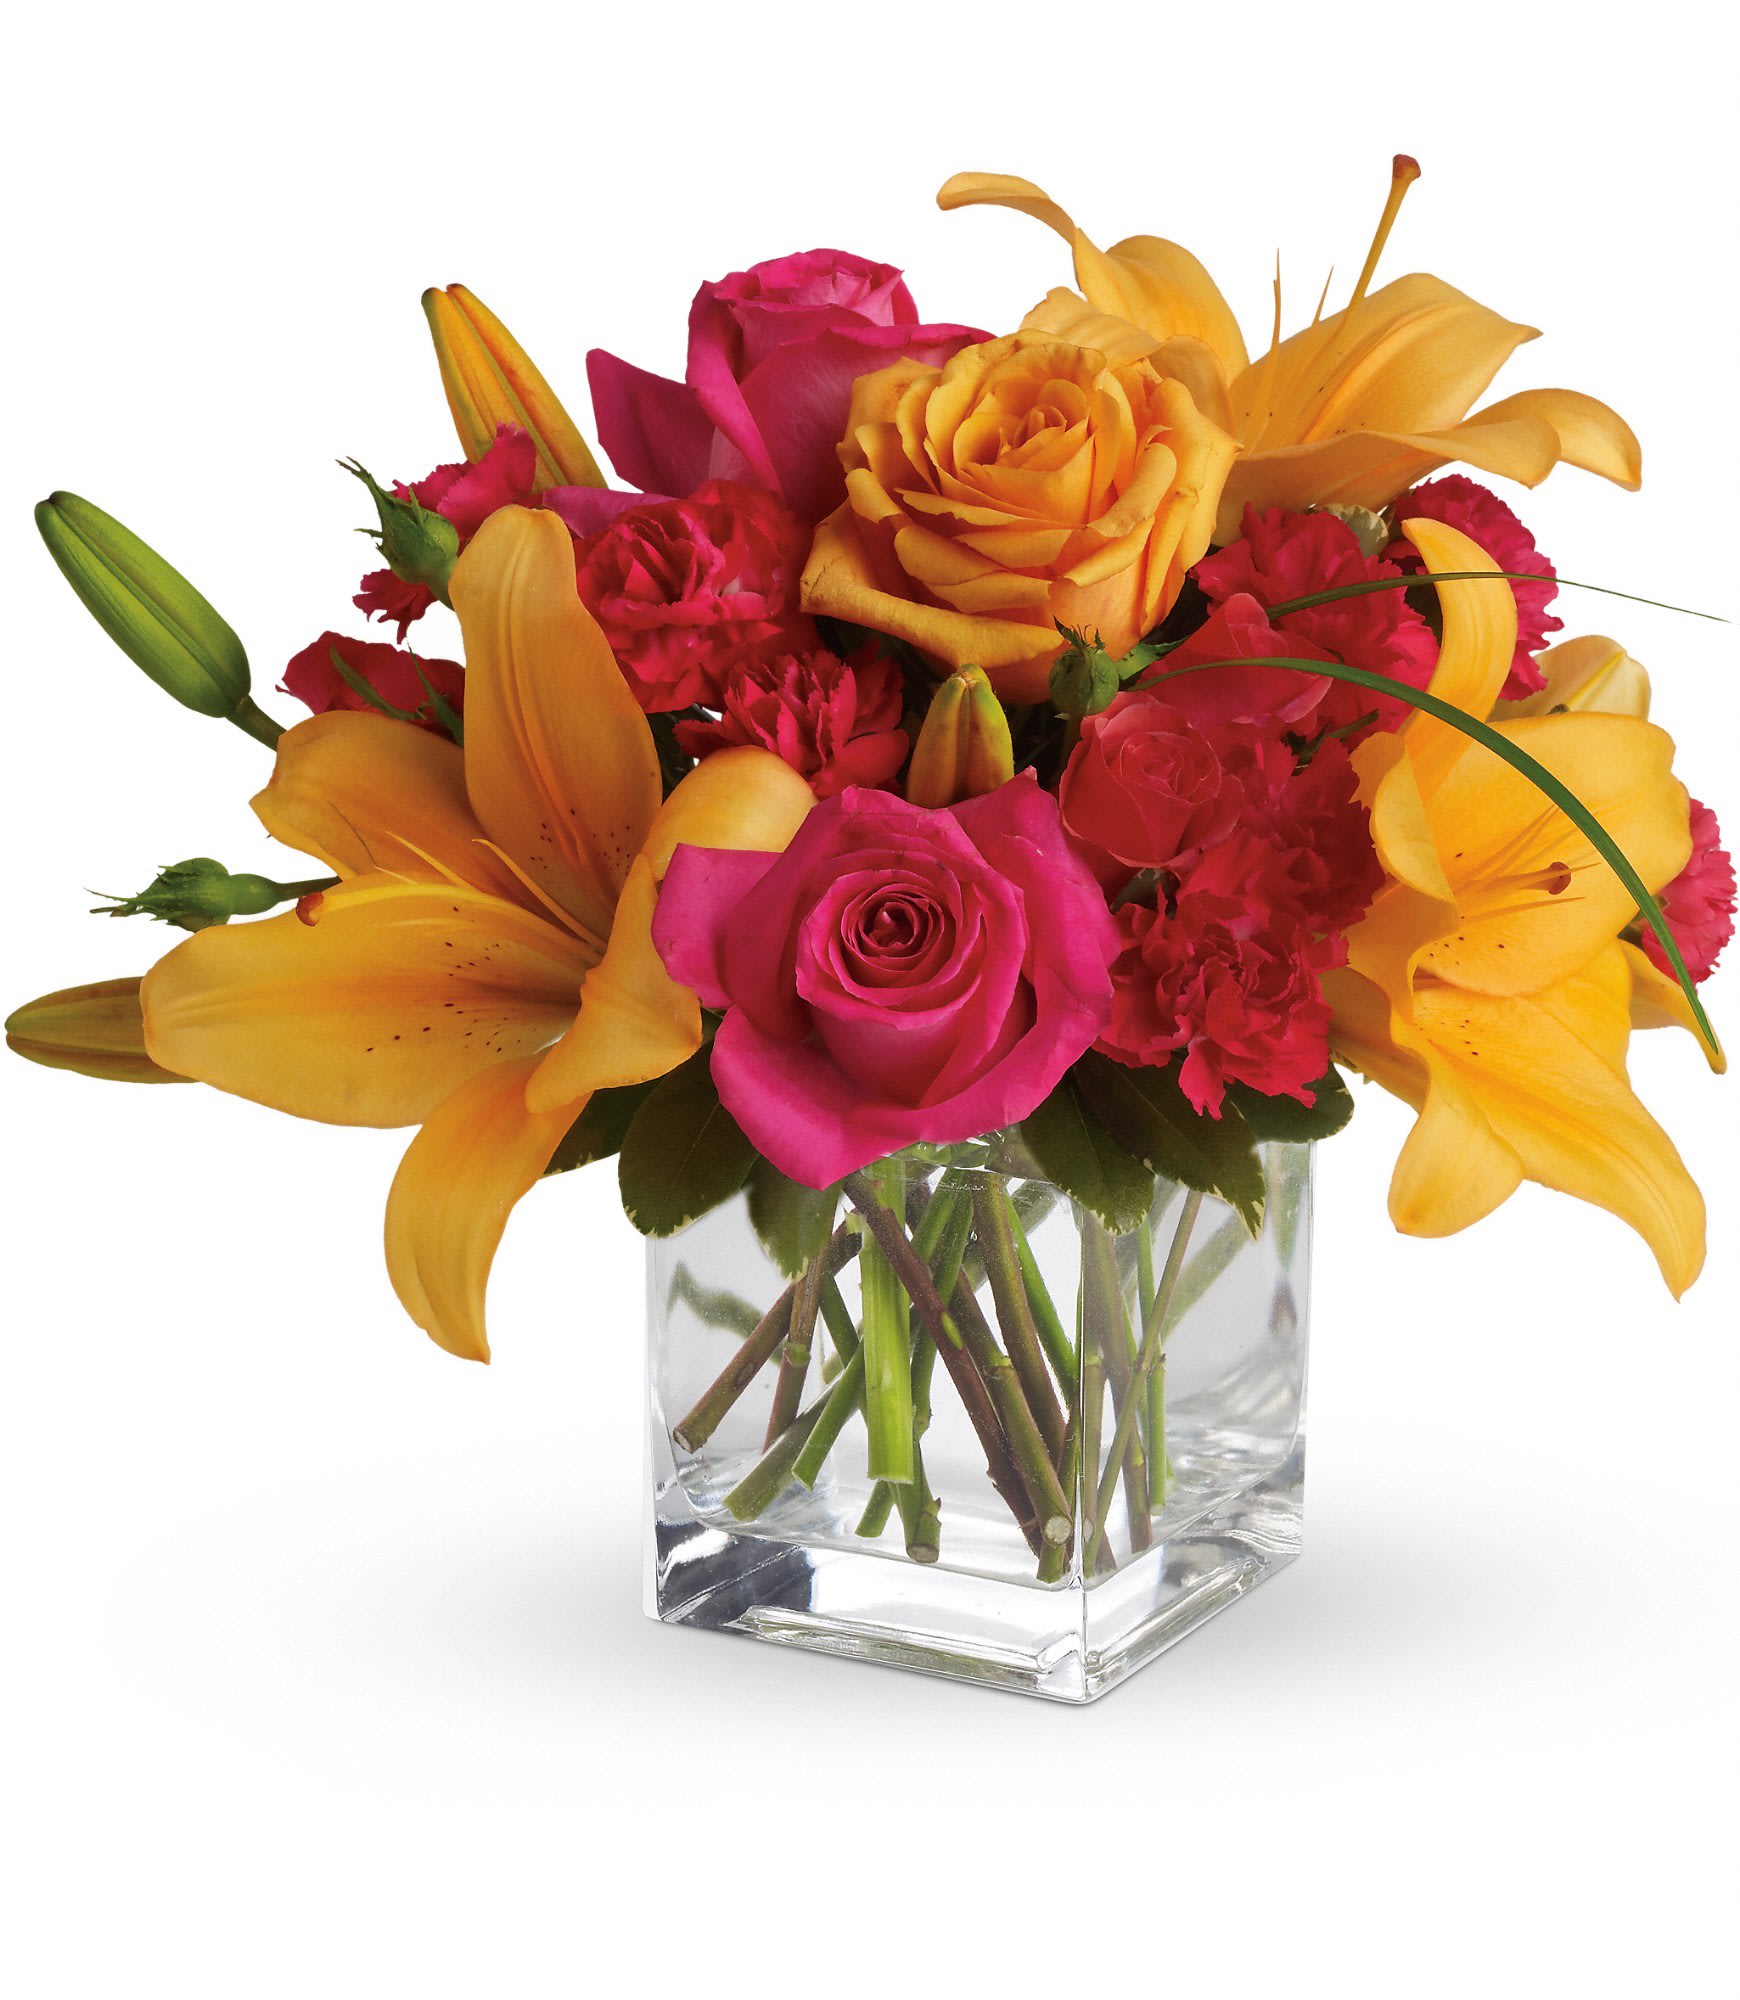 Uniquely Chic - Uniquely beautiful and uniquely bright, this is a bona fide bombshell of a bouquet. Brilliant blossoms are perfectly arranged in an exclusive cube vase. 